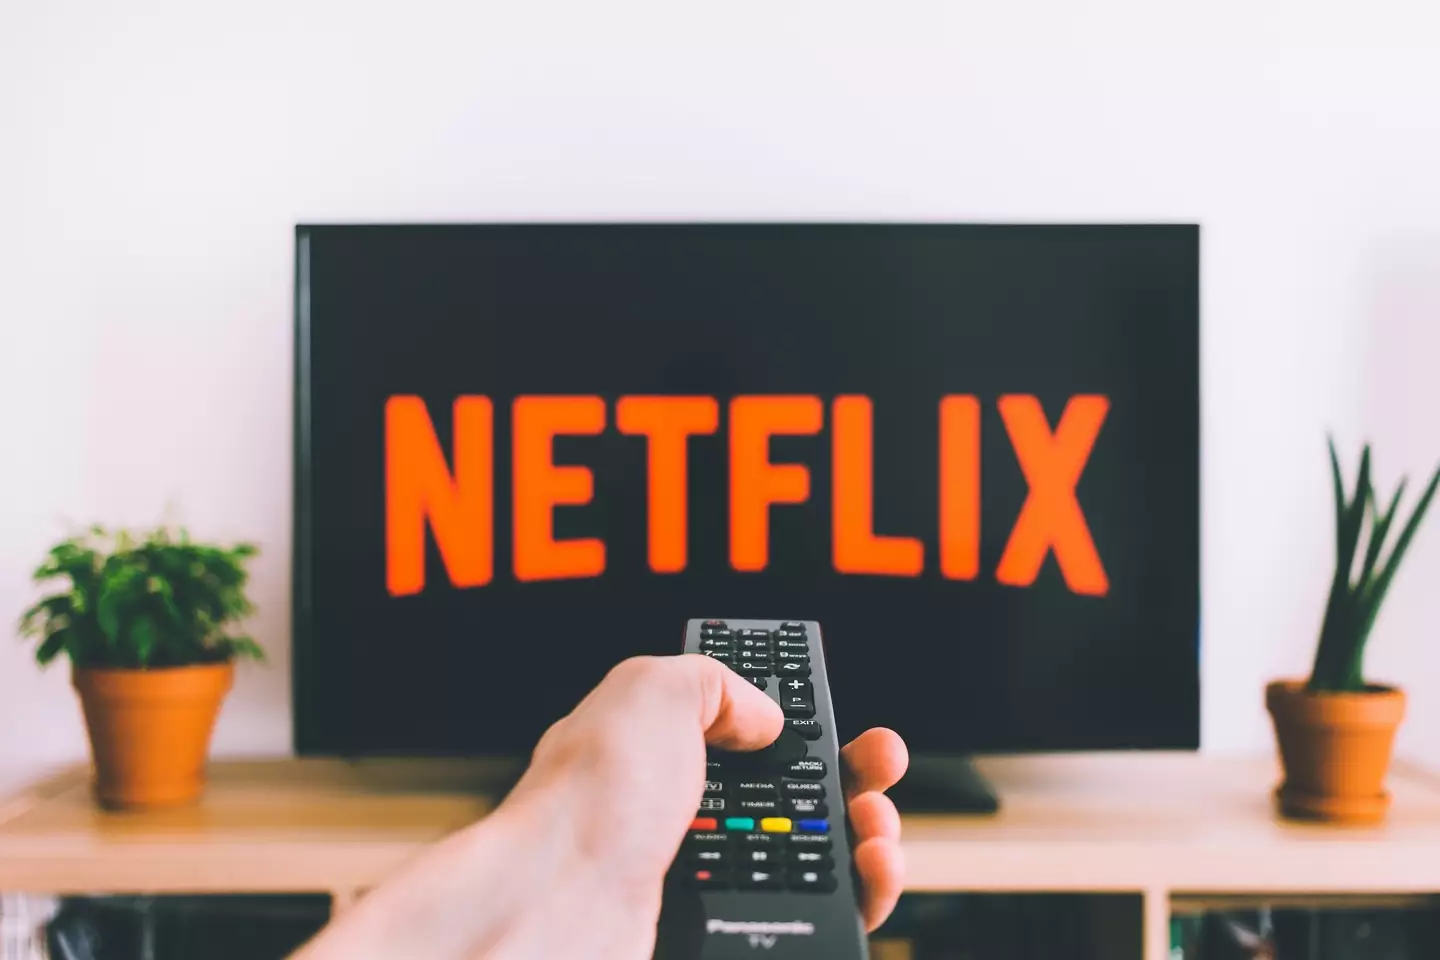 Netflix's secret menu of codes could save hours of endless scrolling.